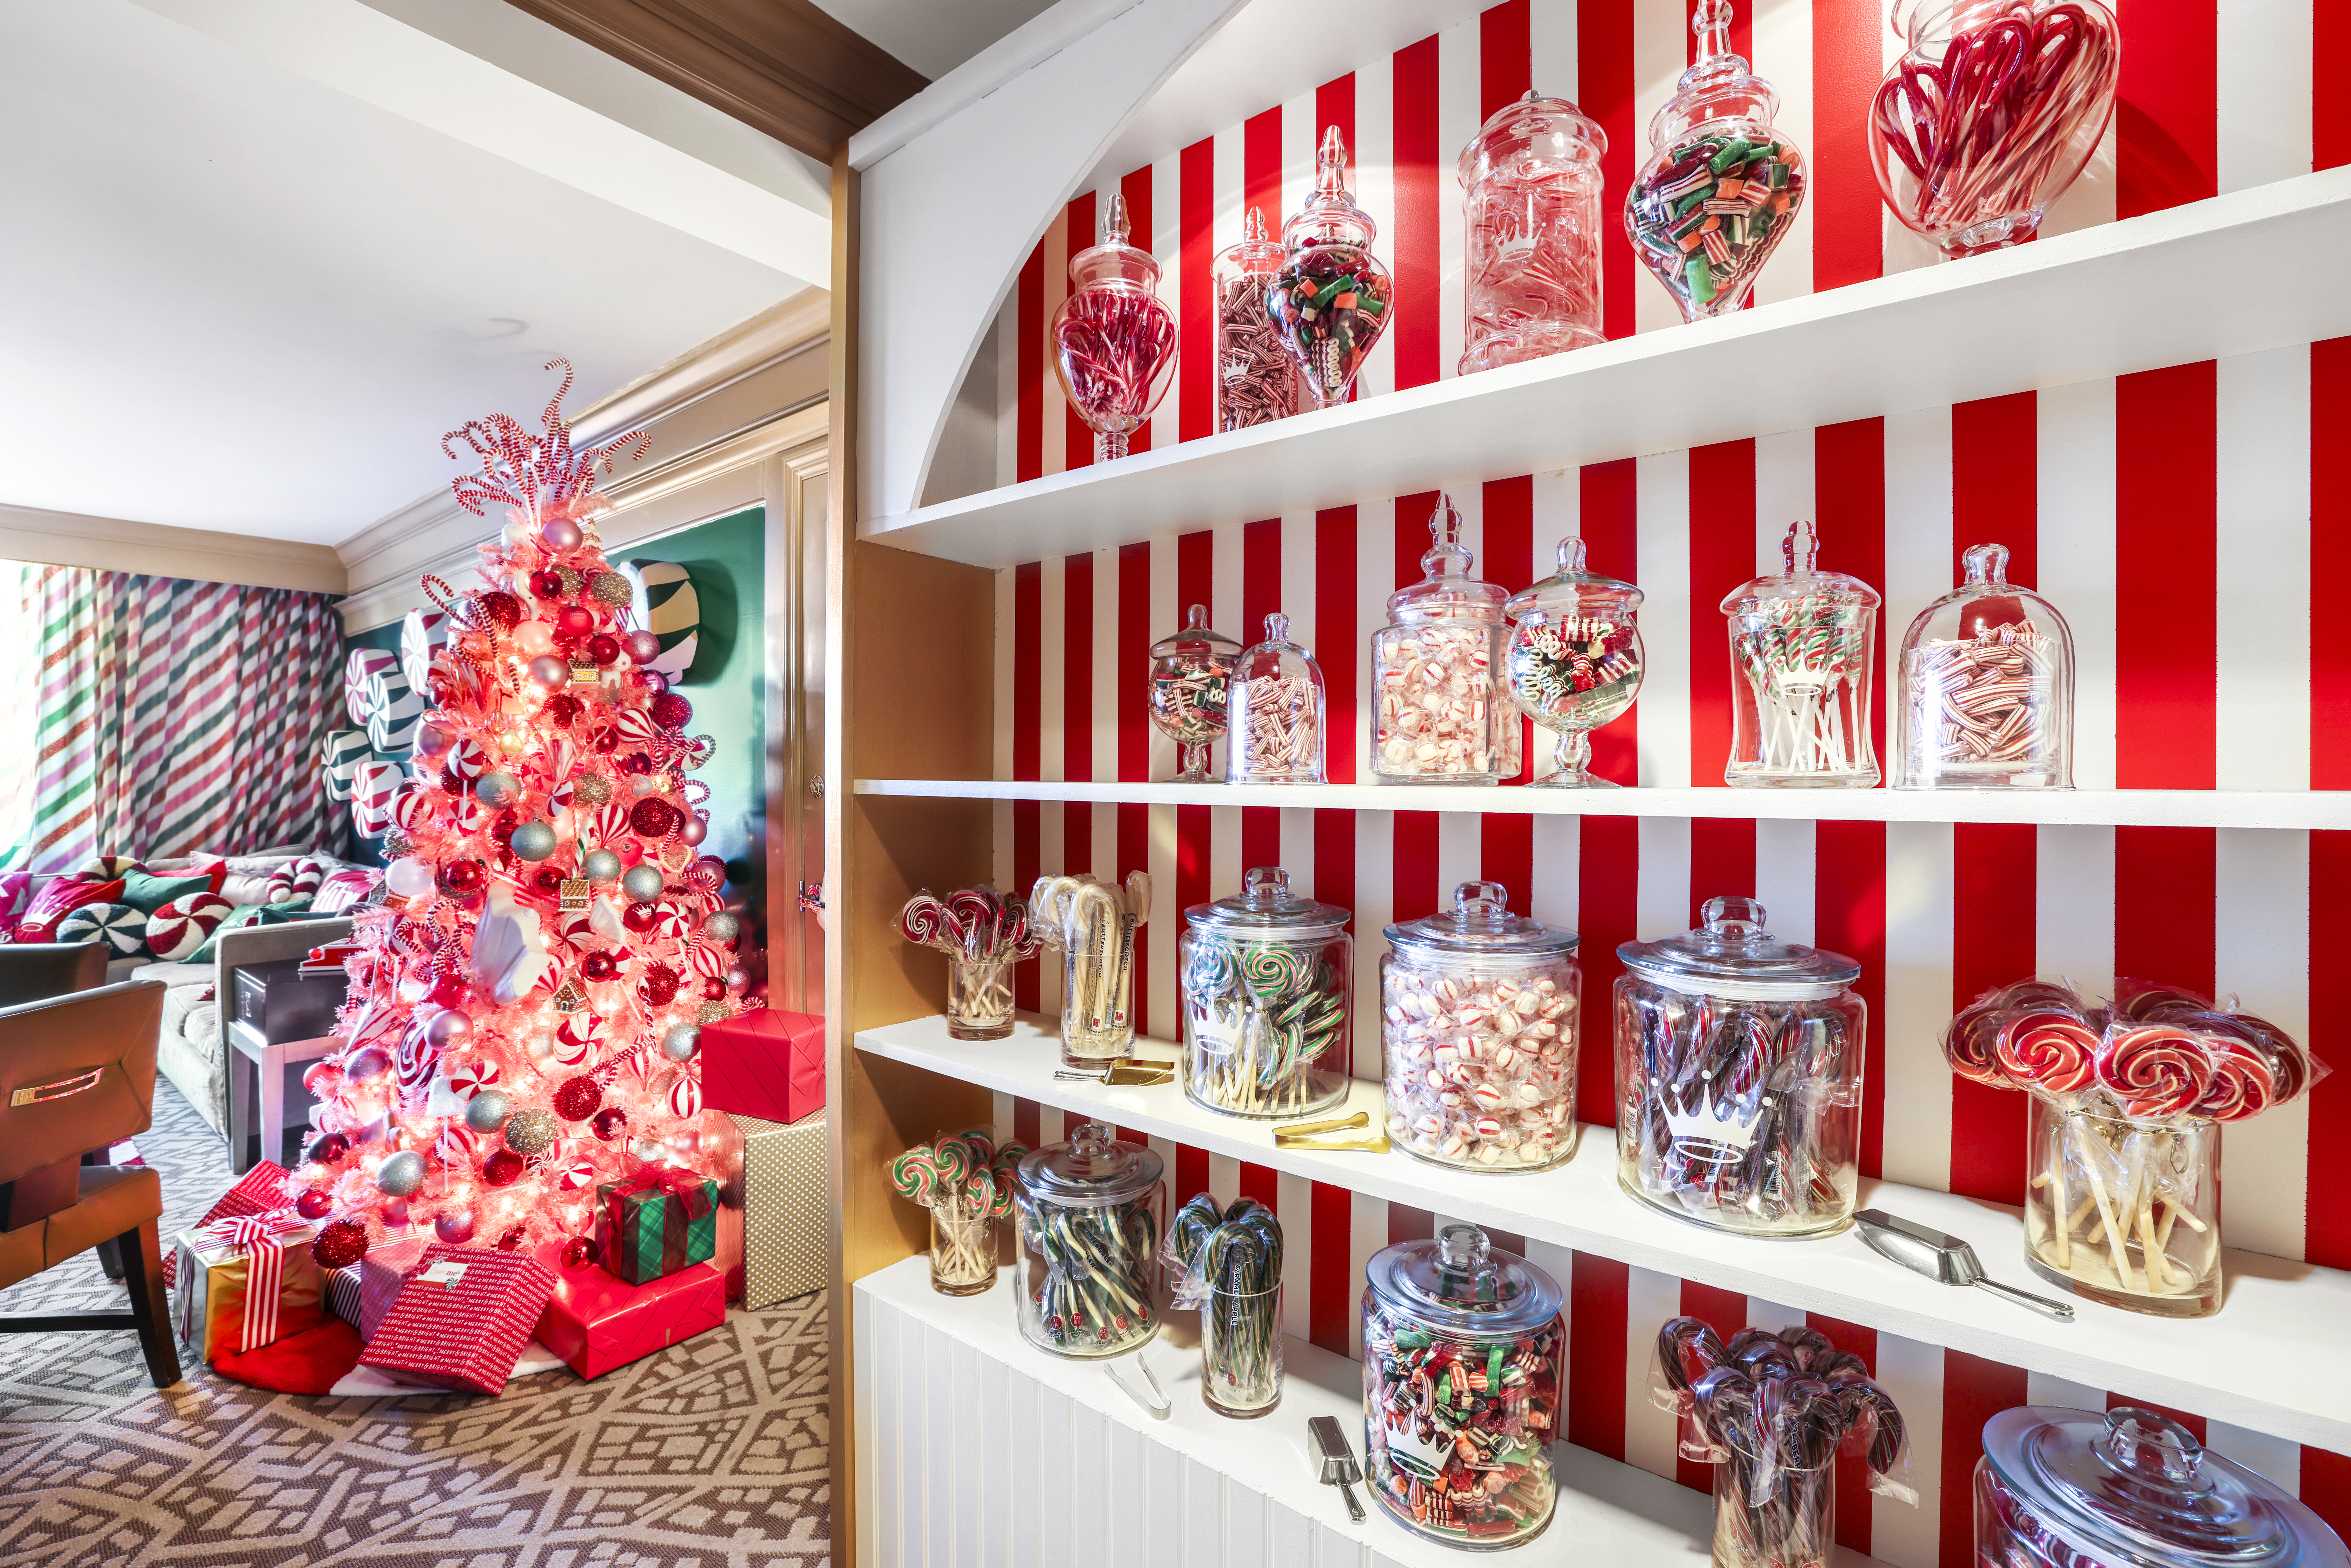 Hilton and Hallmark Channel - Hallmark’s Holiday Sweetest Suite at Hilton New York Times Square - Hallmark Channel Candy Store